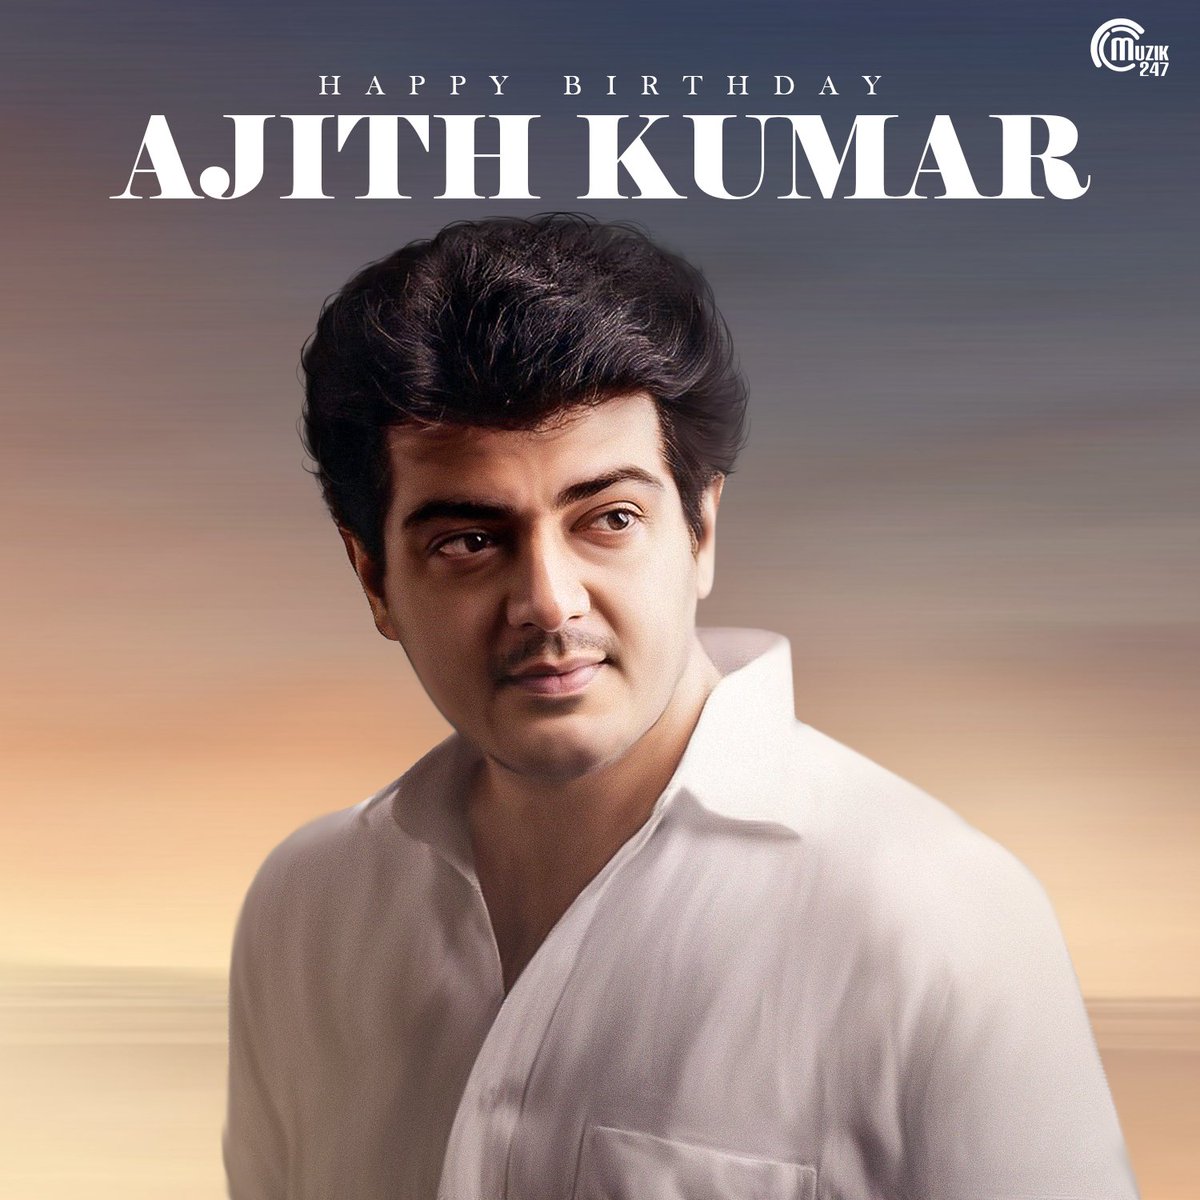 Happy birthday to the charismatic #AjithKumar! Here's to another year of setting the screen on fire with your talent and charm! 🎉🌟🎂 #HBDAjithKumar #HappyBirthdayAjithKumar